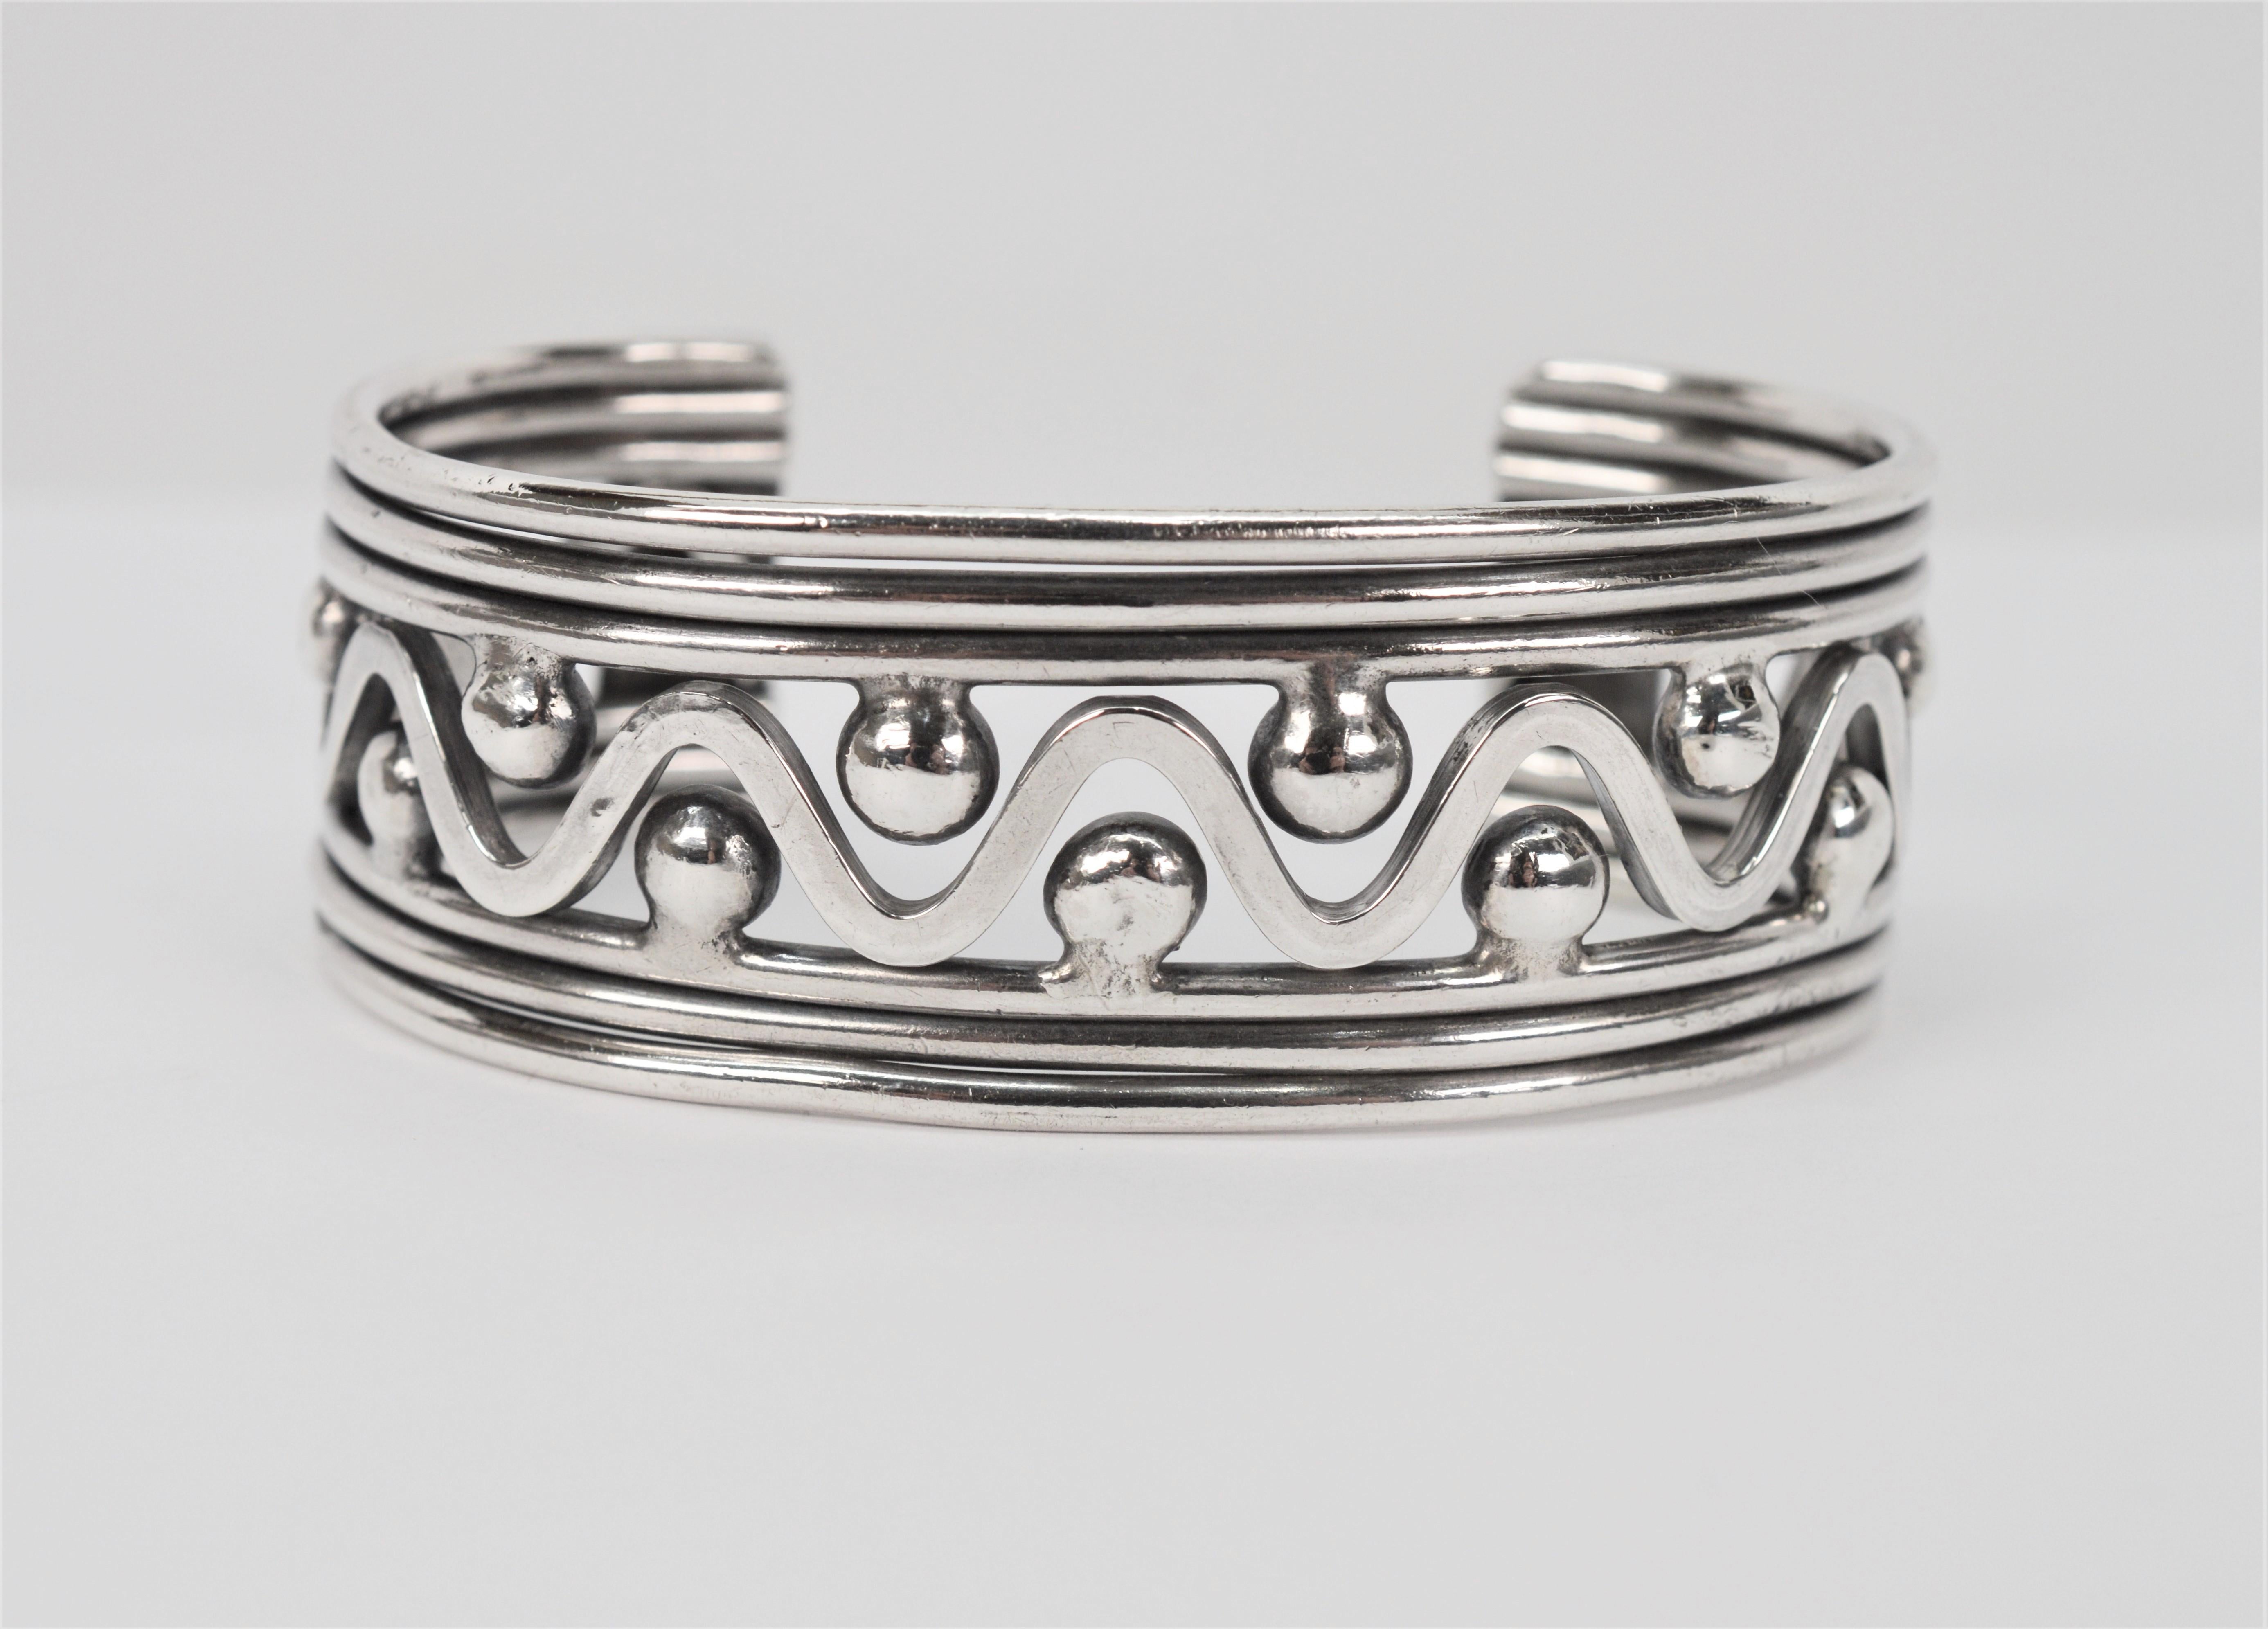 Crafted in .925 sterling silver, this rustic, Artisan made primitive style Sterling Silver Cuff Bracelet brings a bit of whimsy through the simplicity of its geo design. Generous in size, the overall measurement of the piece is 2-5/8 inch. To